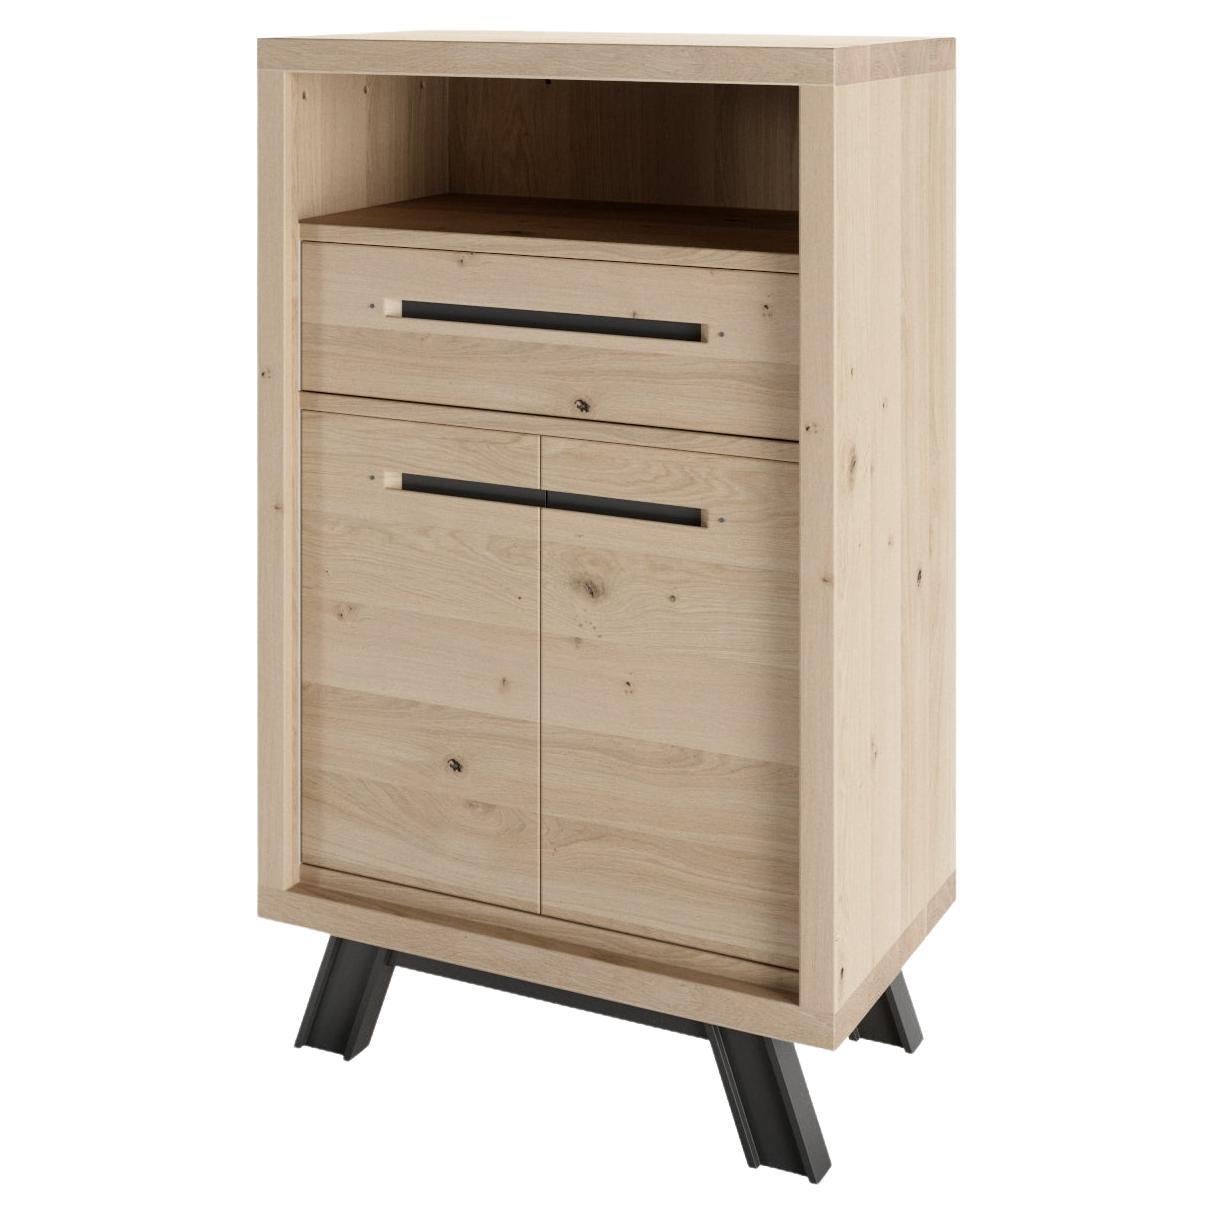 ST James Commode 2 Doors 1 Drawer 1 Niche For Sale